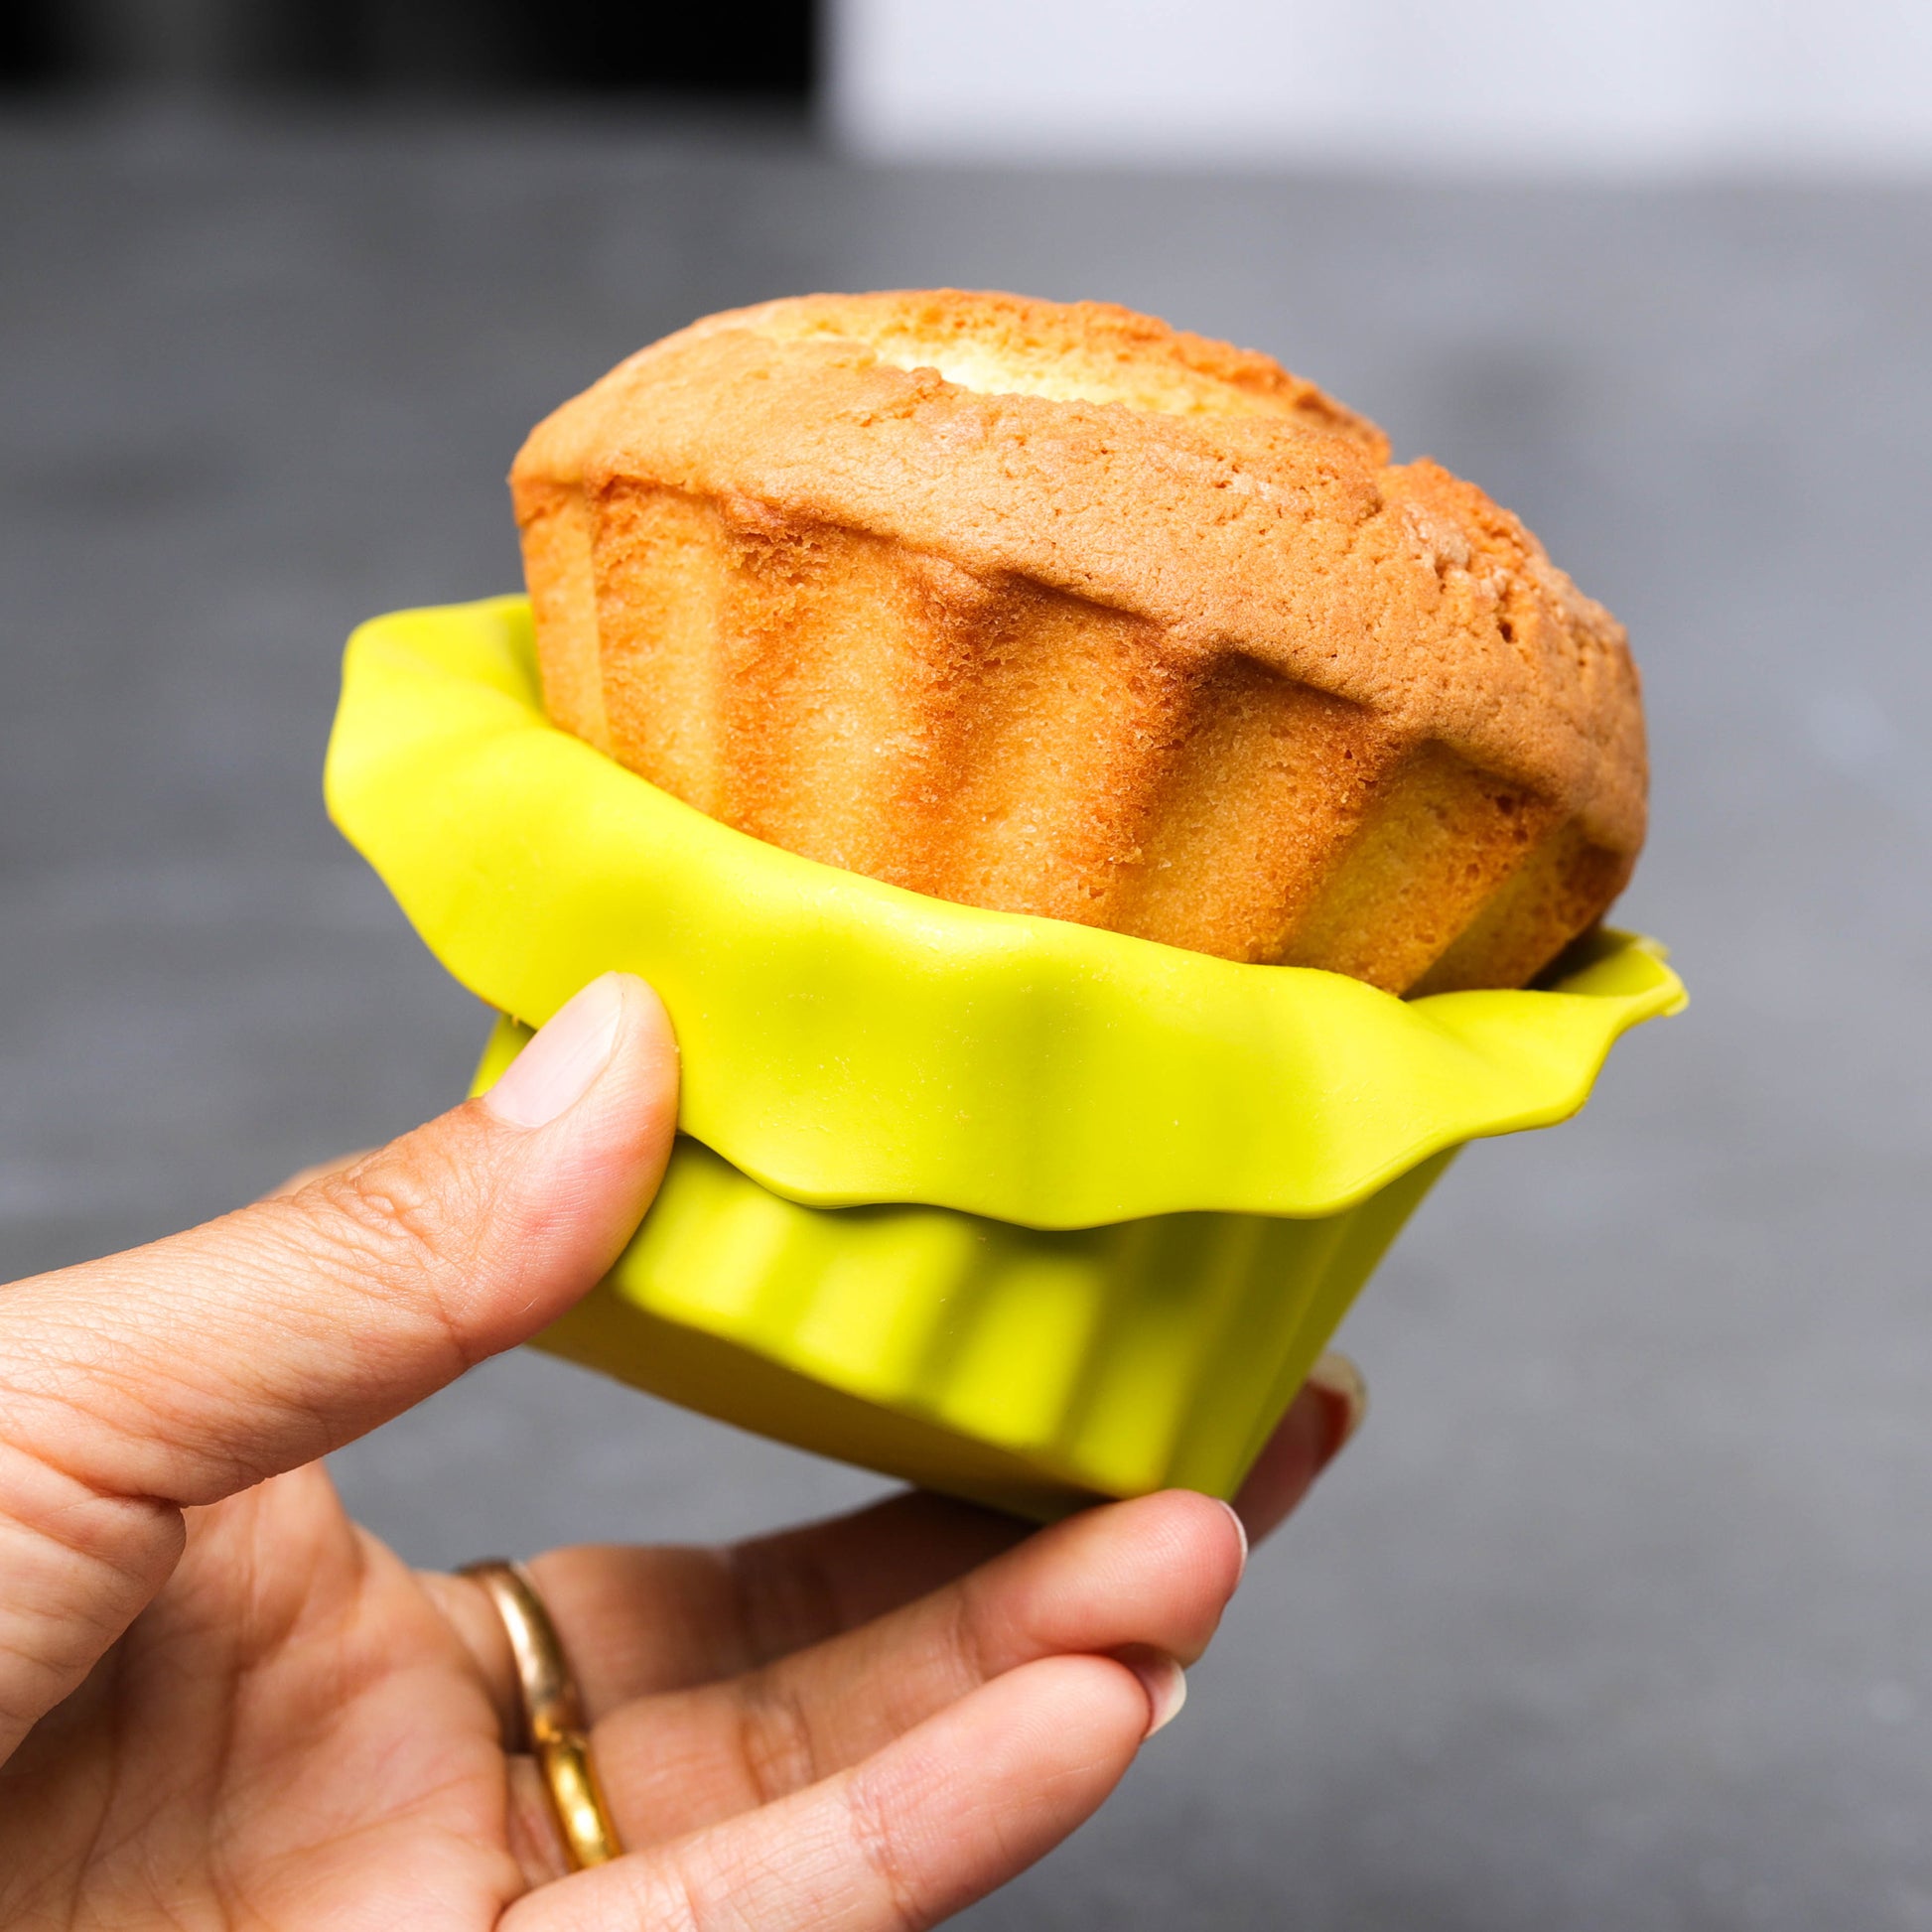 Silicone reusable muffin cups